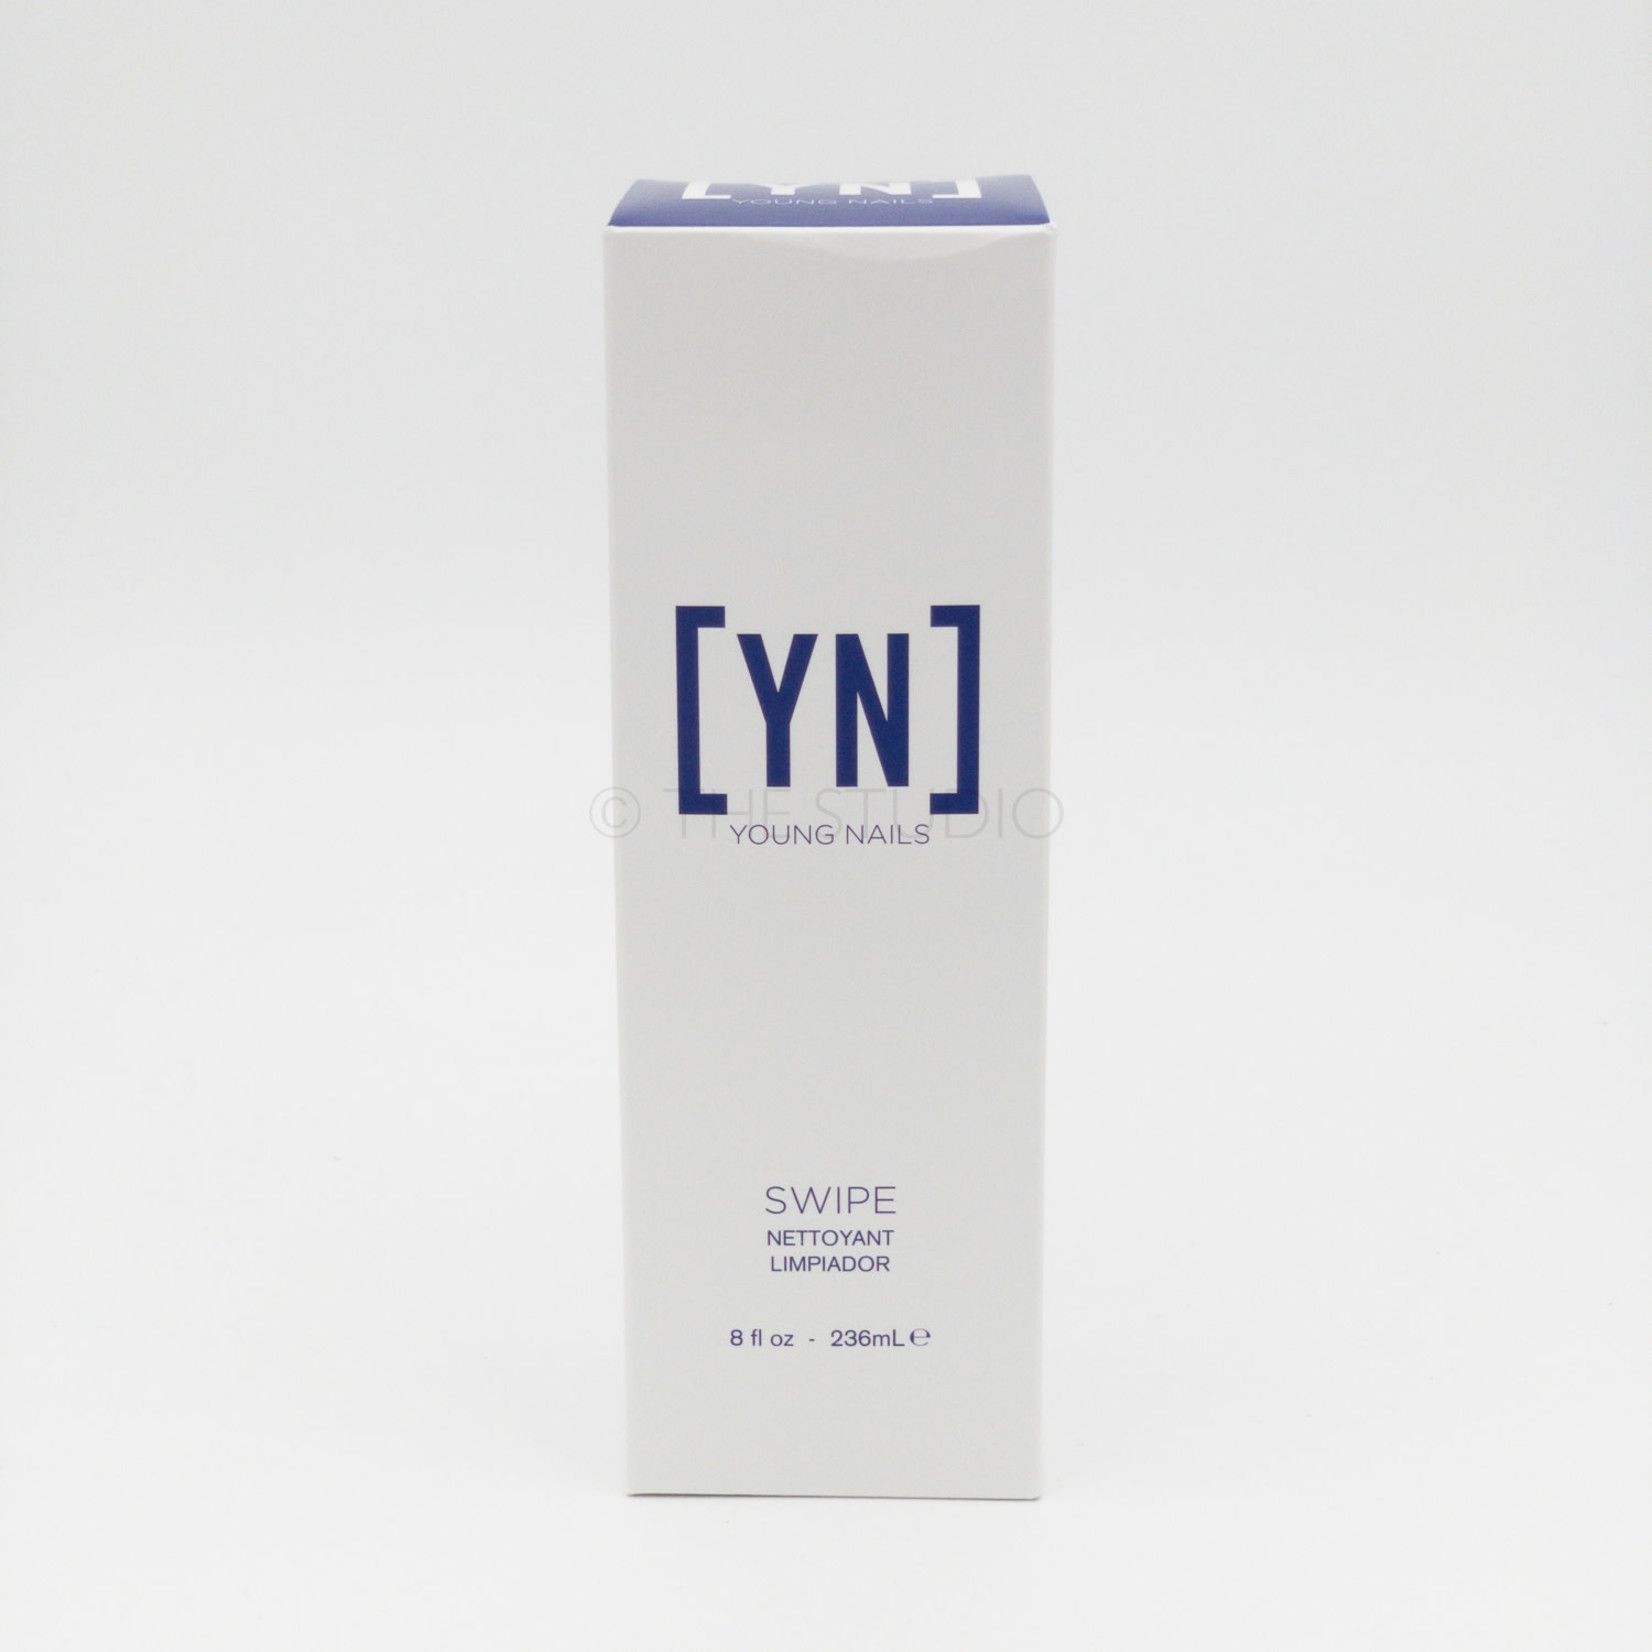 Young Nails Young Nails - Swipe - 8 oz